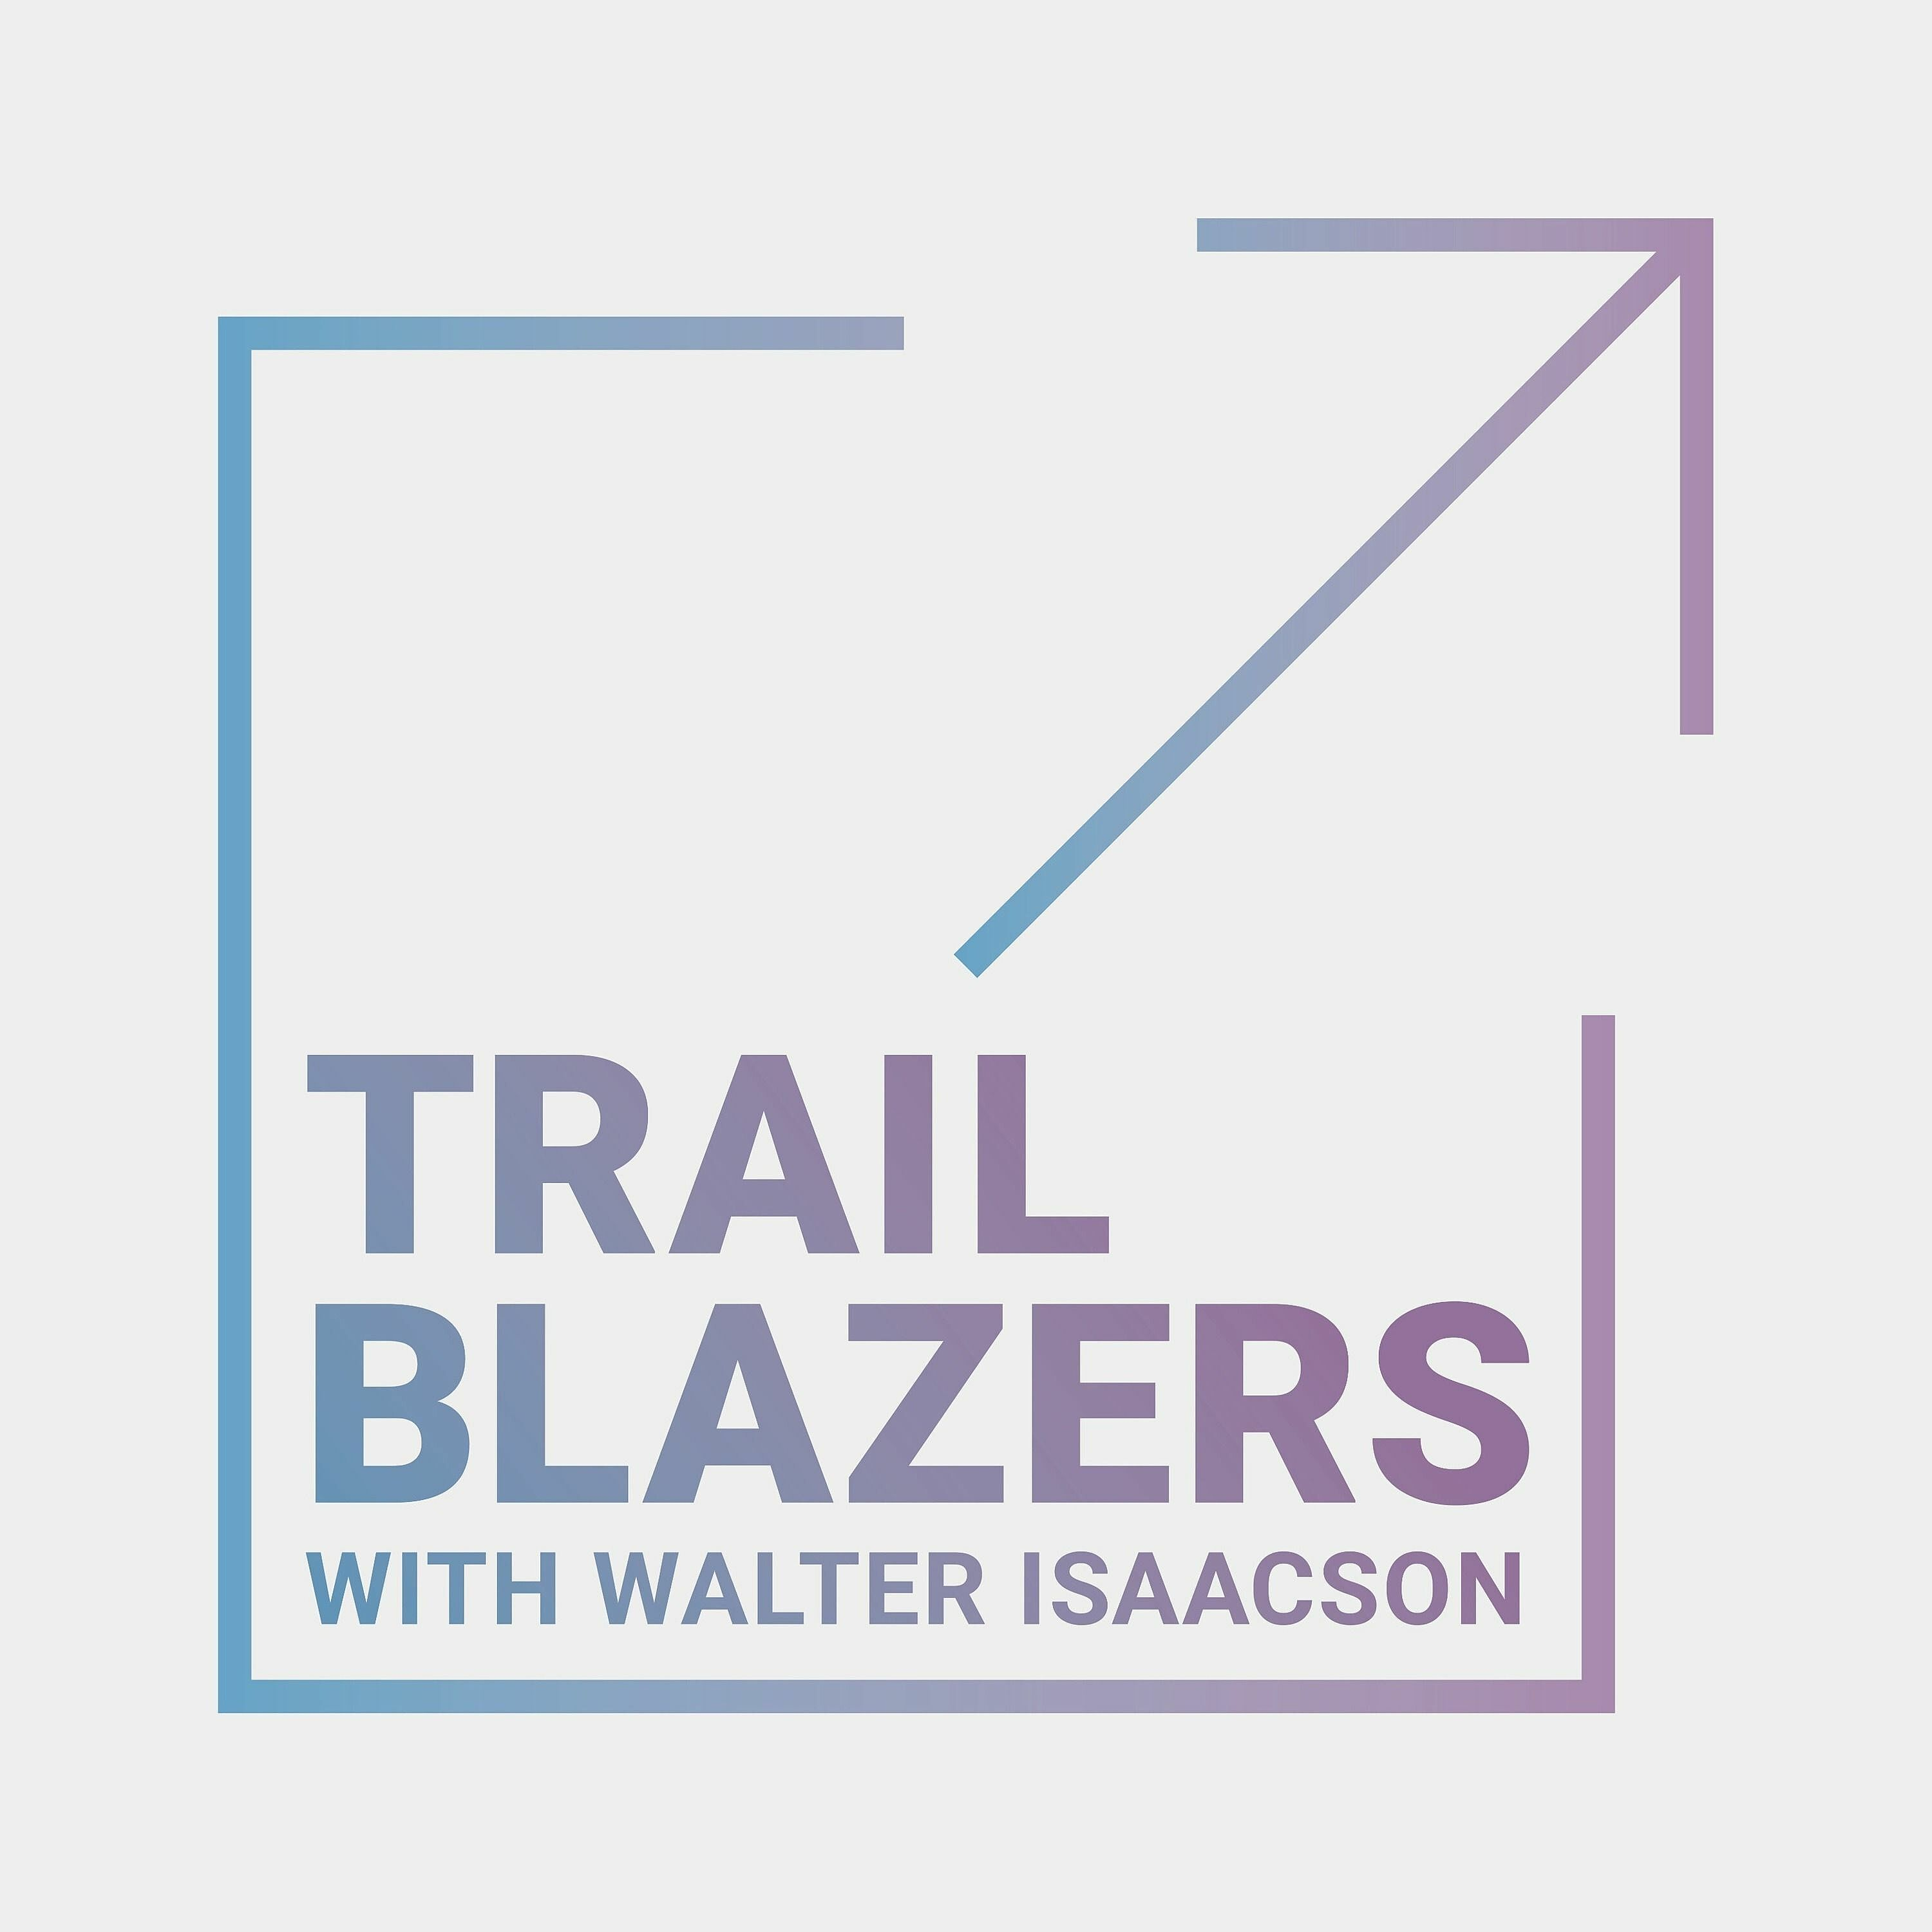 Podcasts: A Storytelling Breakthrough (S4E18 of Trailblazers with Walter Isaacson)